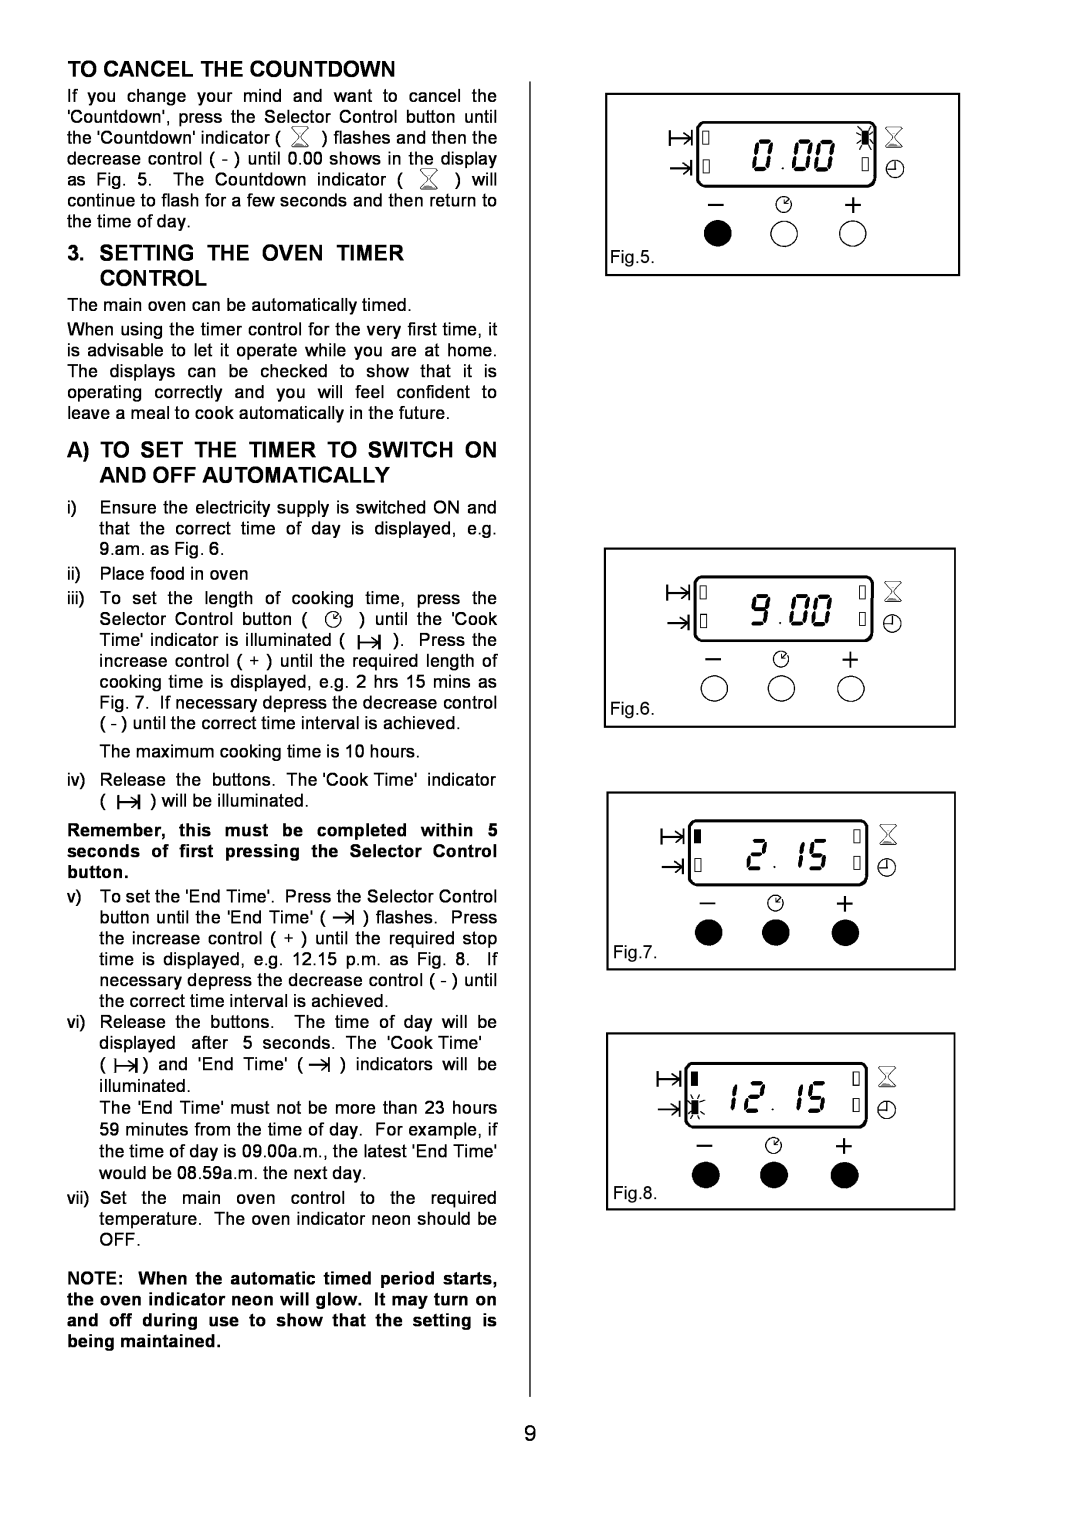 Zanussi ZOU 330 manual To Cancel The Countdown, Setting The Oven Timer Control 